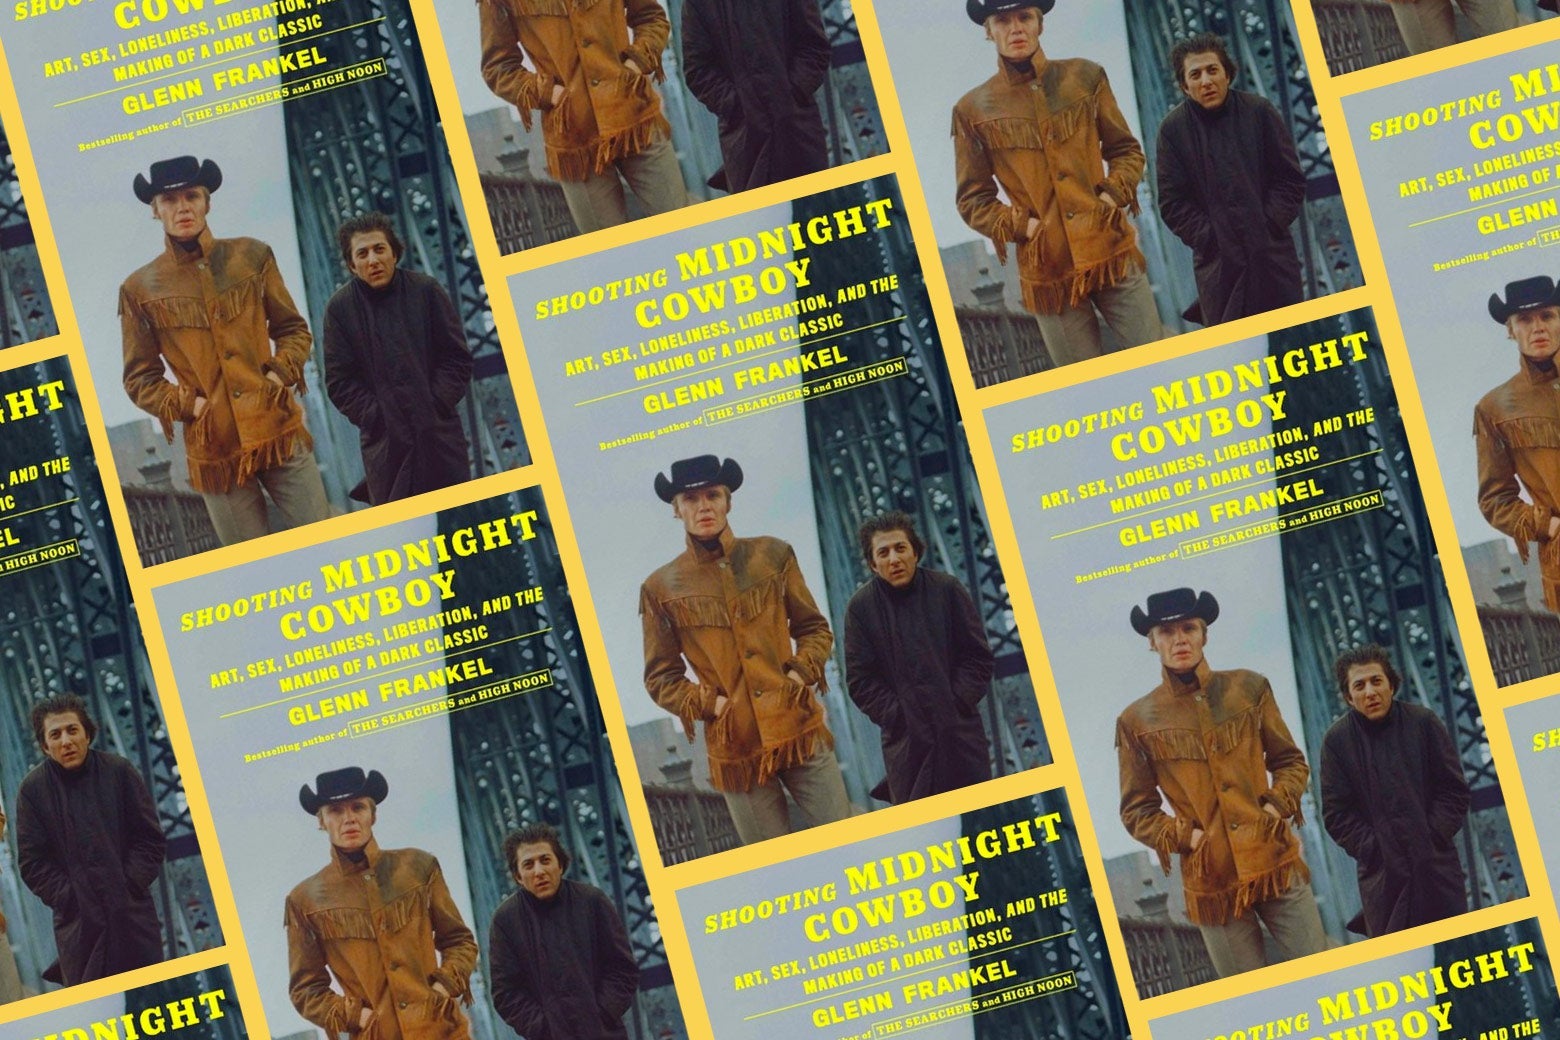 A repeating pattern of covers of Shooting Midnight Cowboy.